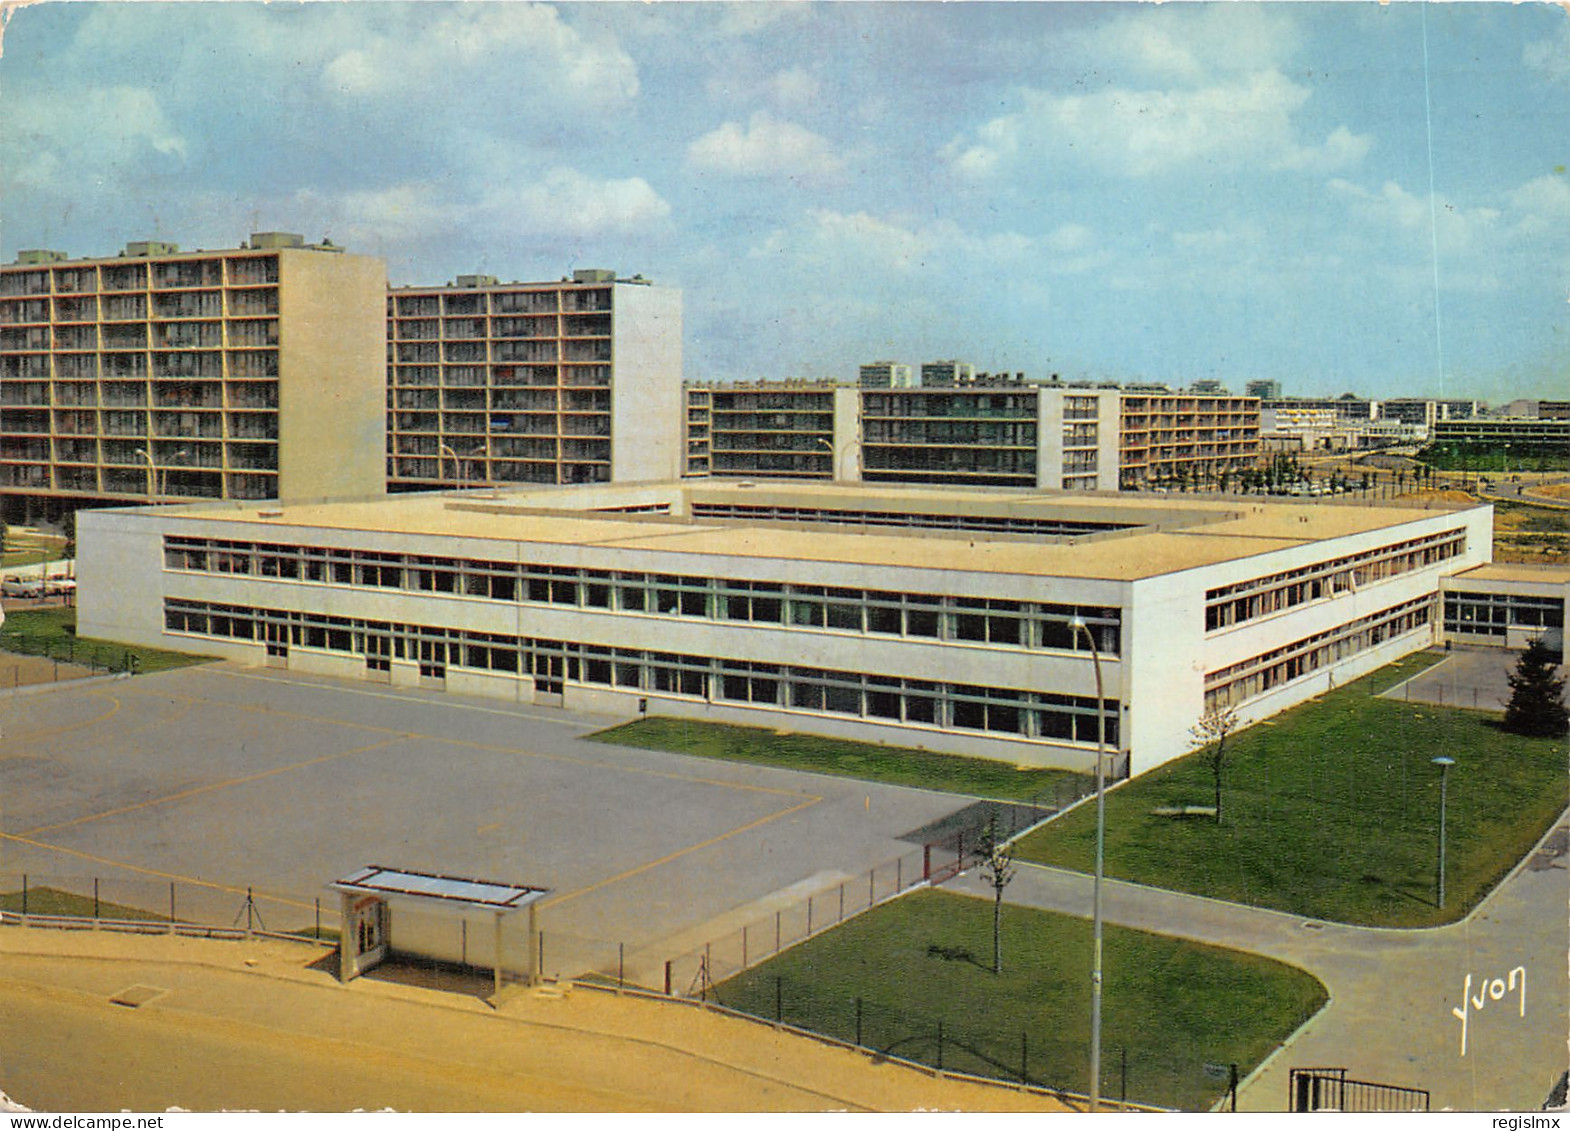 78-VELIZY VILLACOUBLAY-N°T562-A/0309 - Velizy